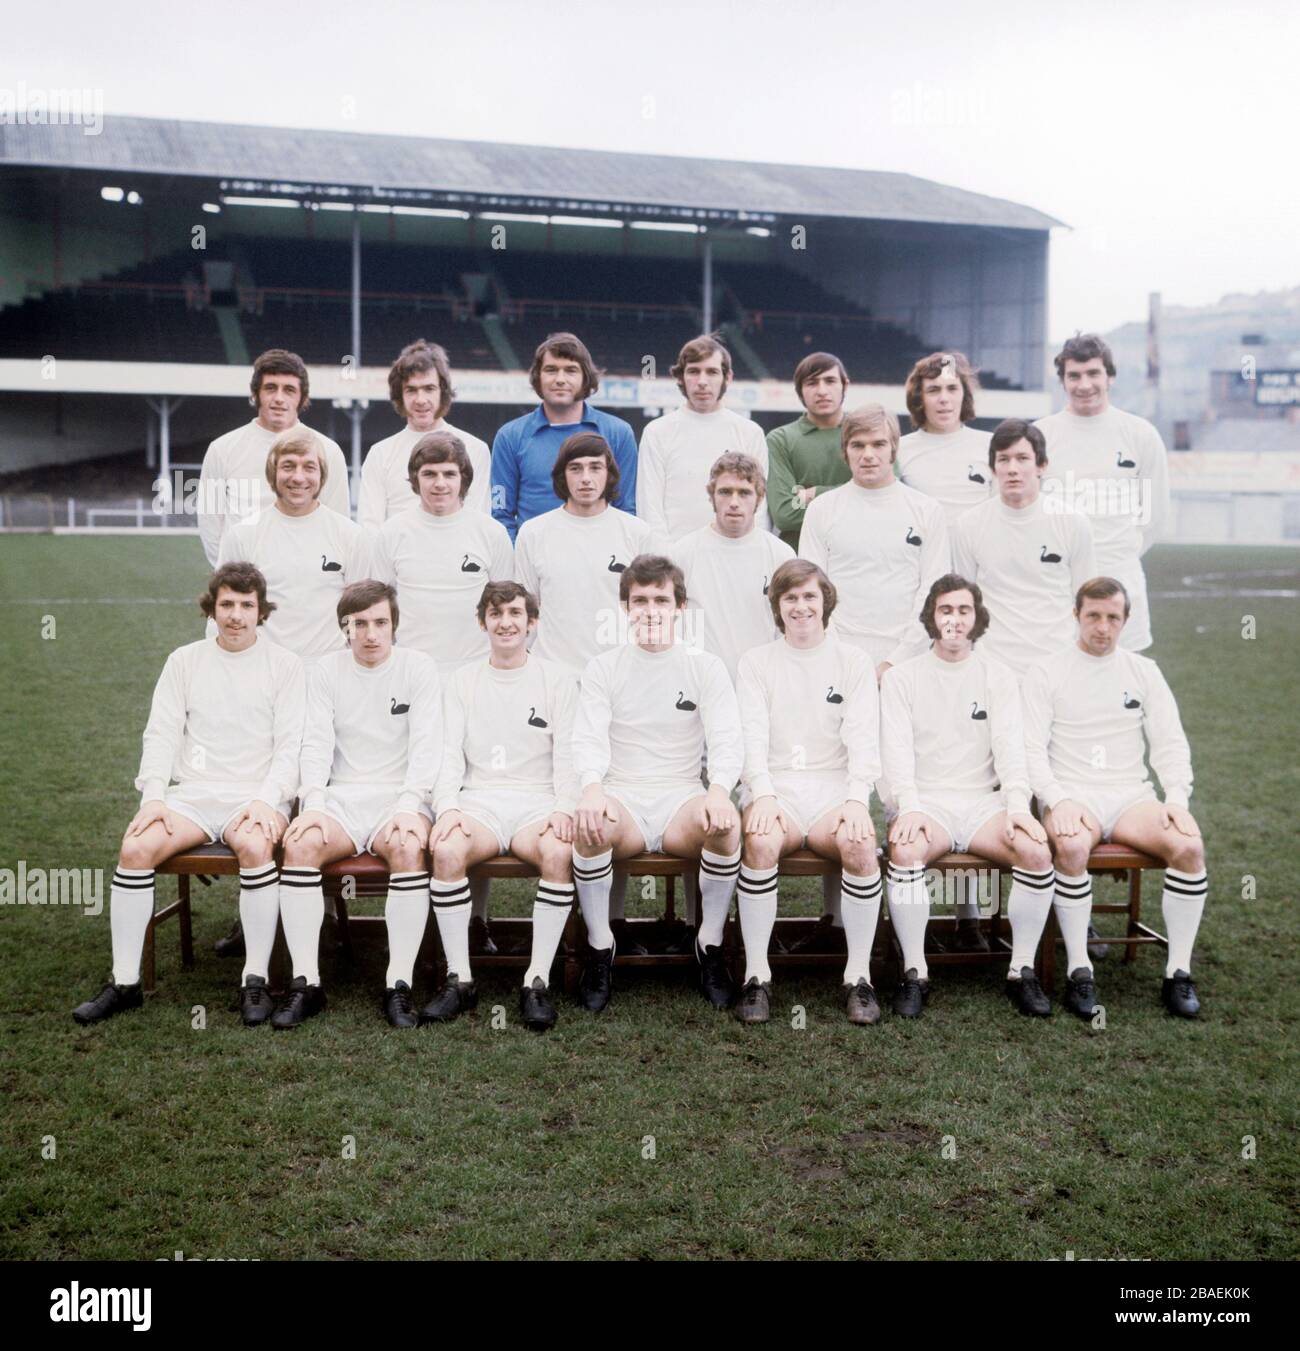 Swansea City Team Group. (l-r top) Geoff Thomas, Brian Evans, Tony Millington, Barry Hole, Don Payne, Keith Evans. David Gwyther. (Middle row l-r) Alan Williams, Wyndham Evans, Glen Davies, (James) Clive Slattery, Phil Holme, alan Sullivan. (Front l-r) Alan Beer, Denley Morgan, Willie Screen, Herbie Williams, Anthony Screen, Peter Jones and Len Hill. Stock Photo